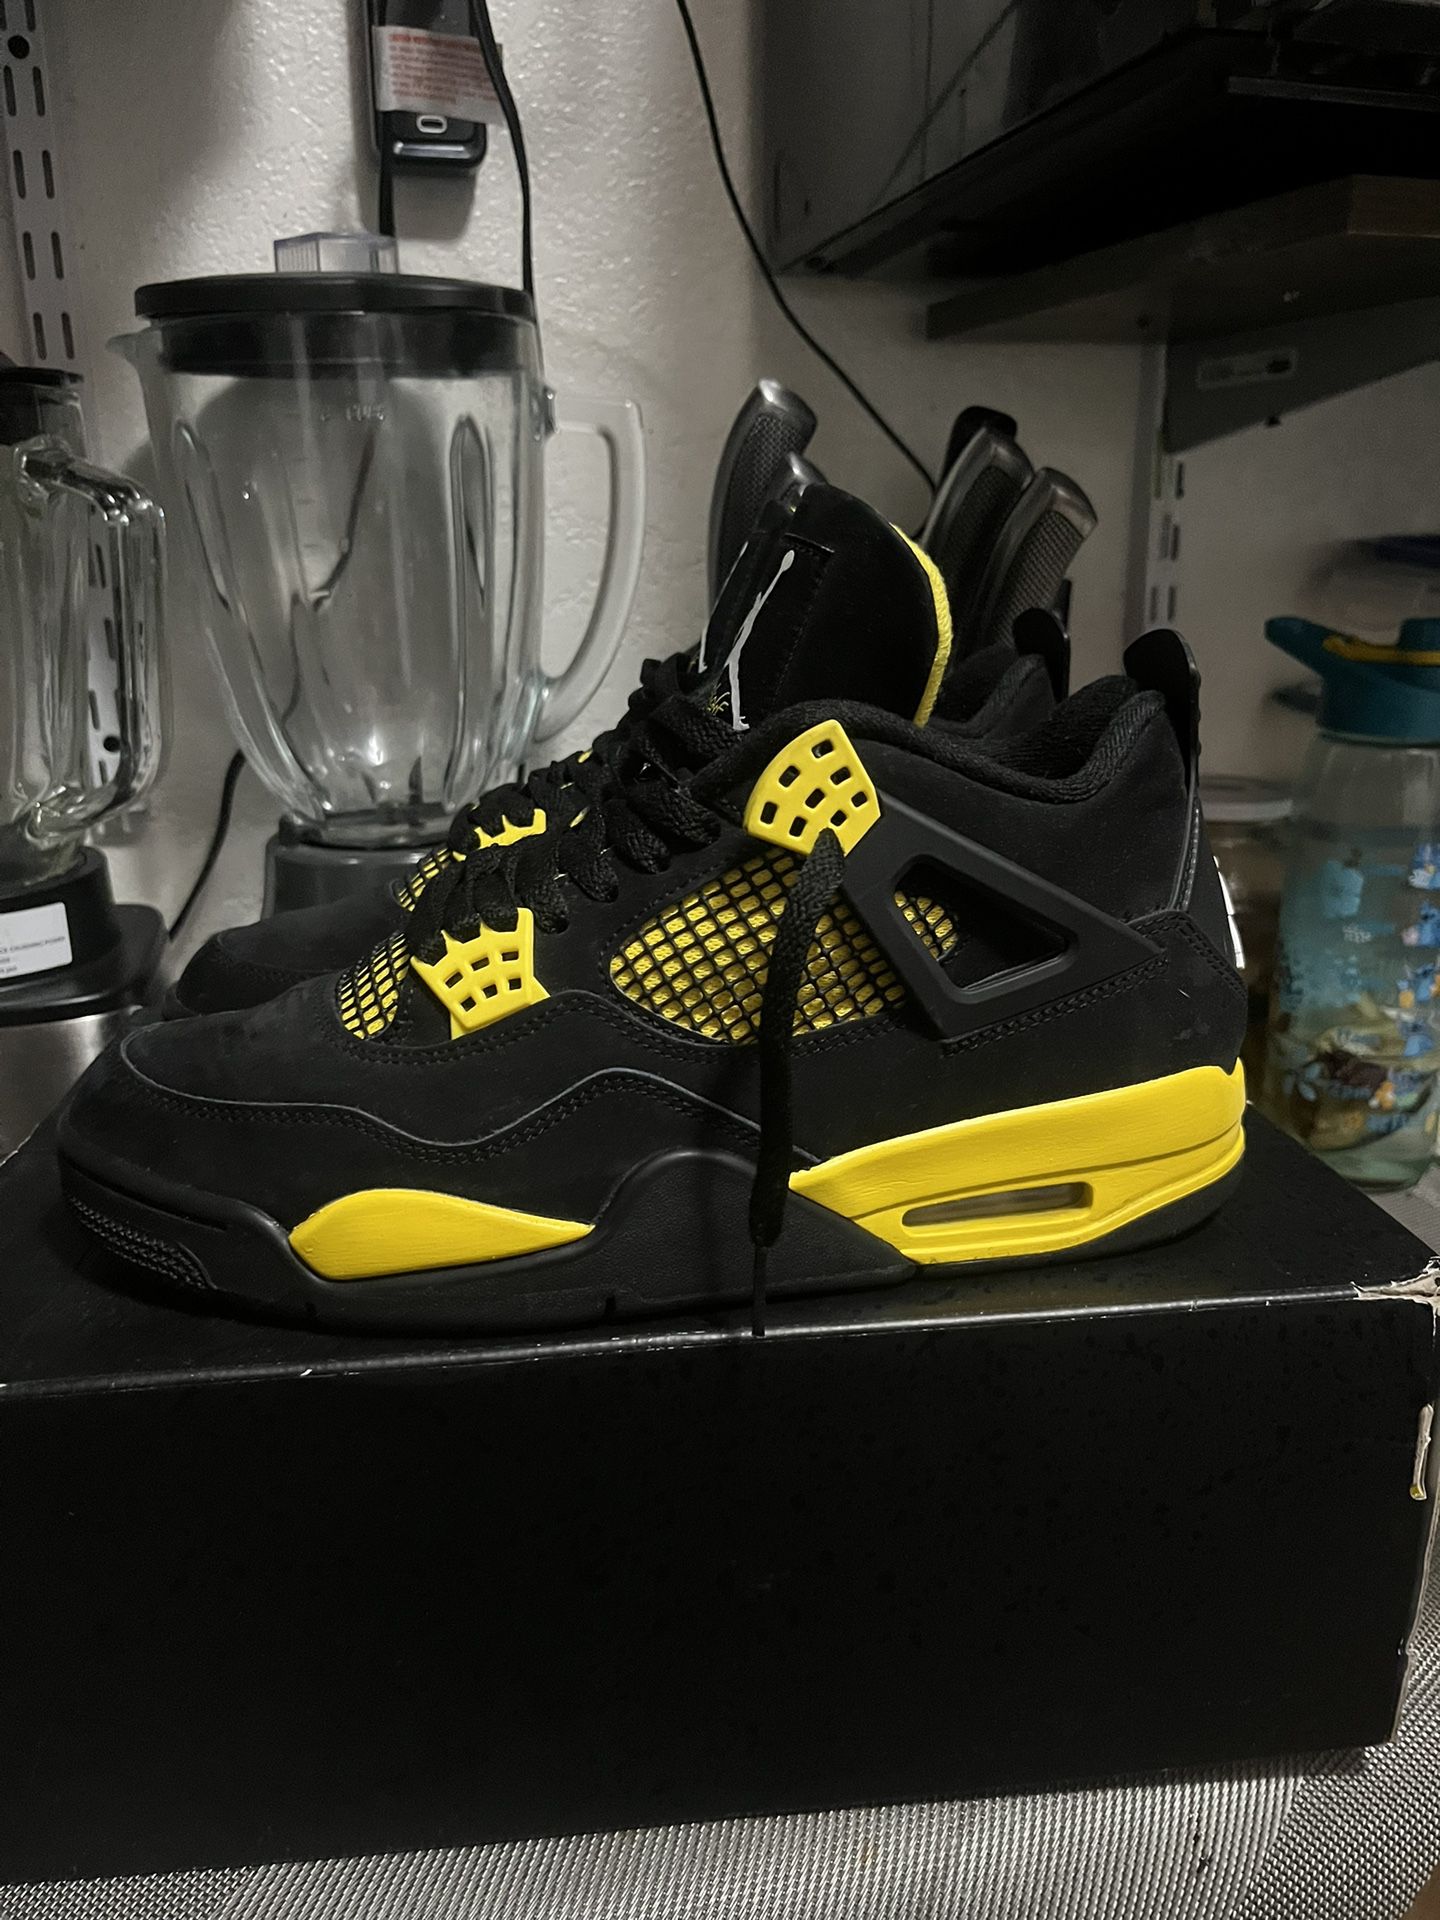 Jordan 4 Size 9.5 Open To Trades Payed Over 300